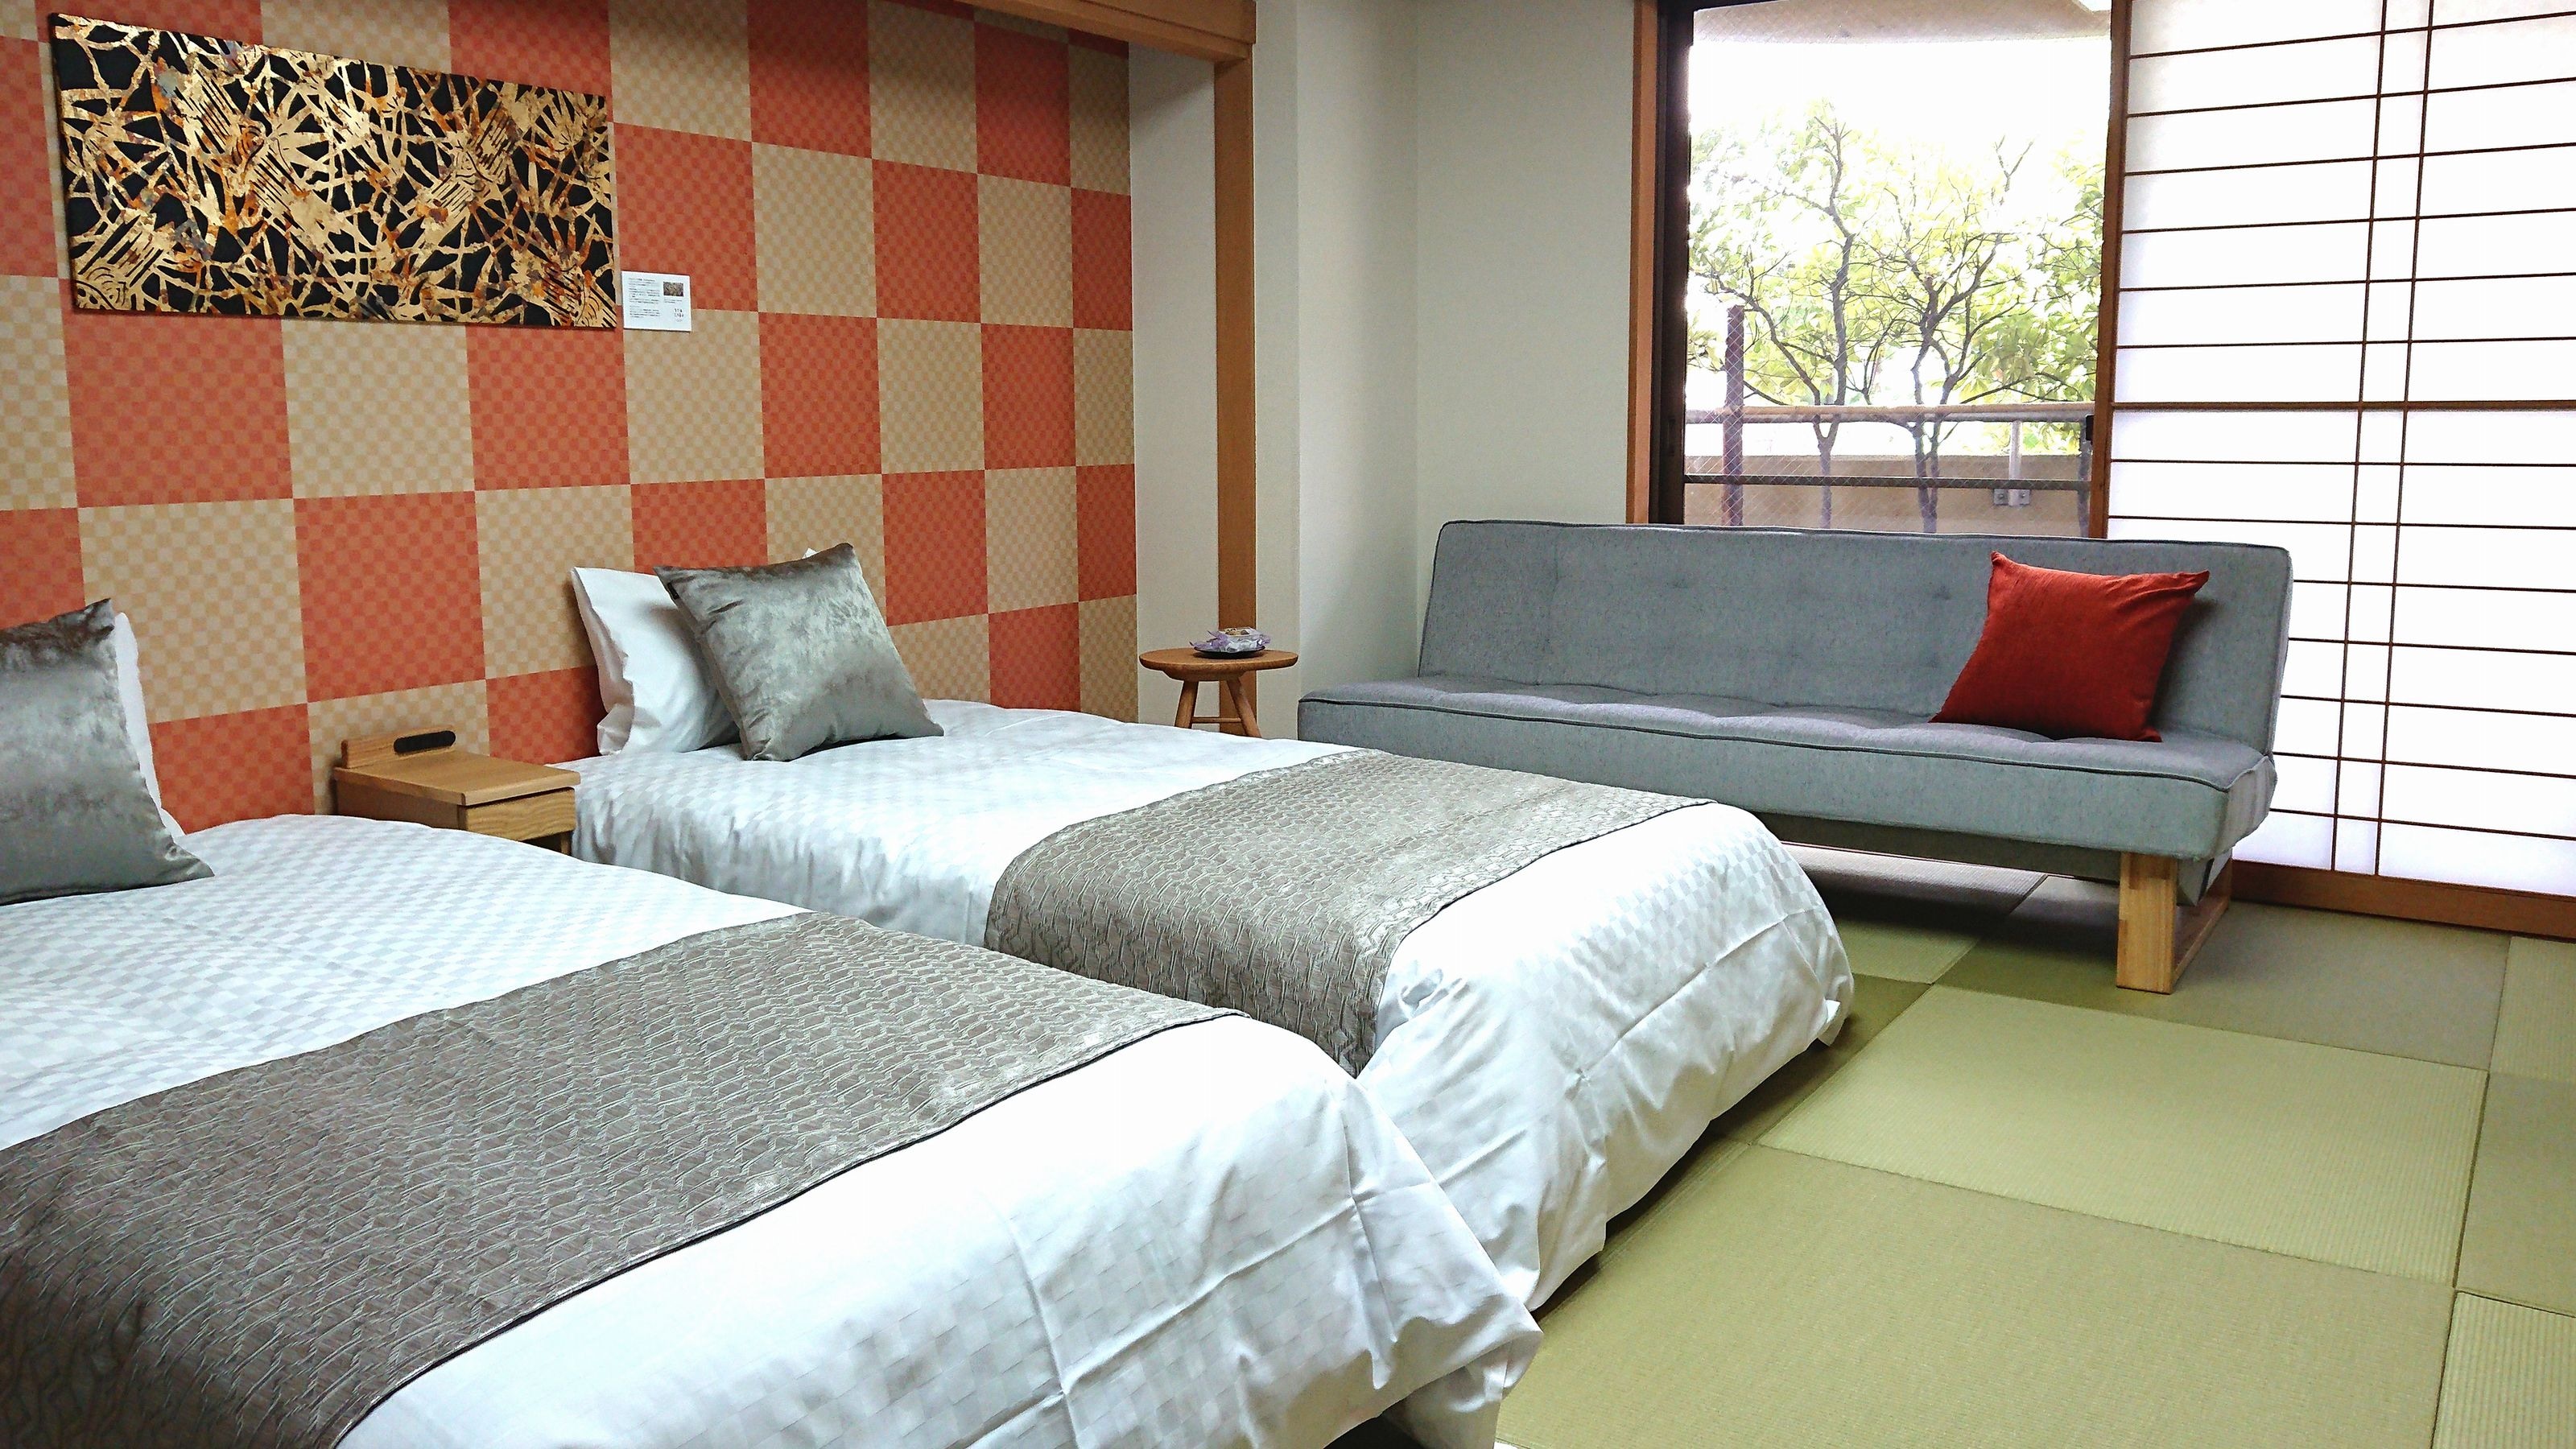 General guest room Japanese-style bed image ♪ Twin beds are available in the Japanese-style room.